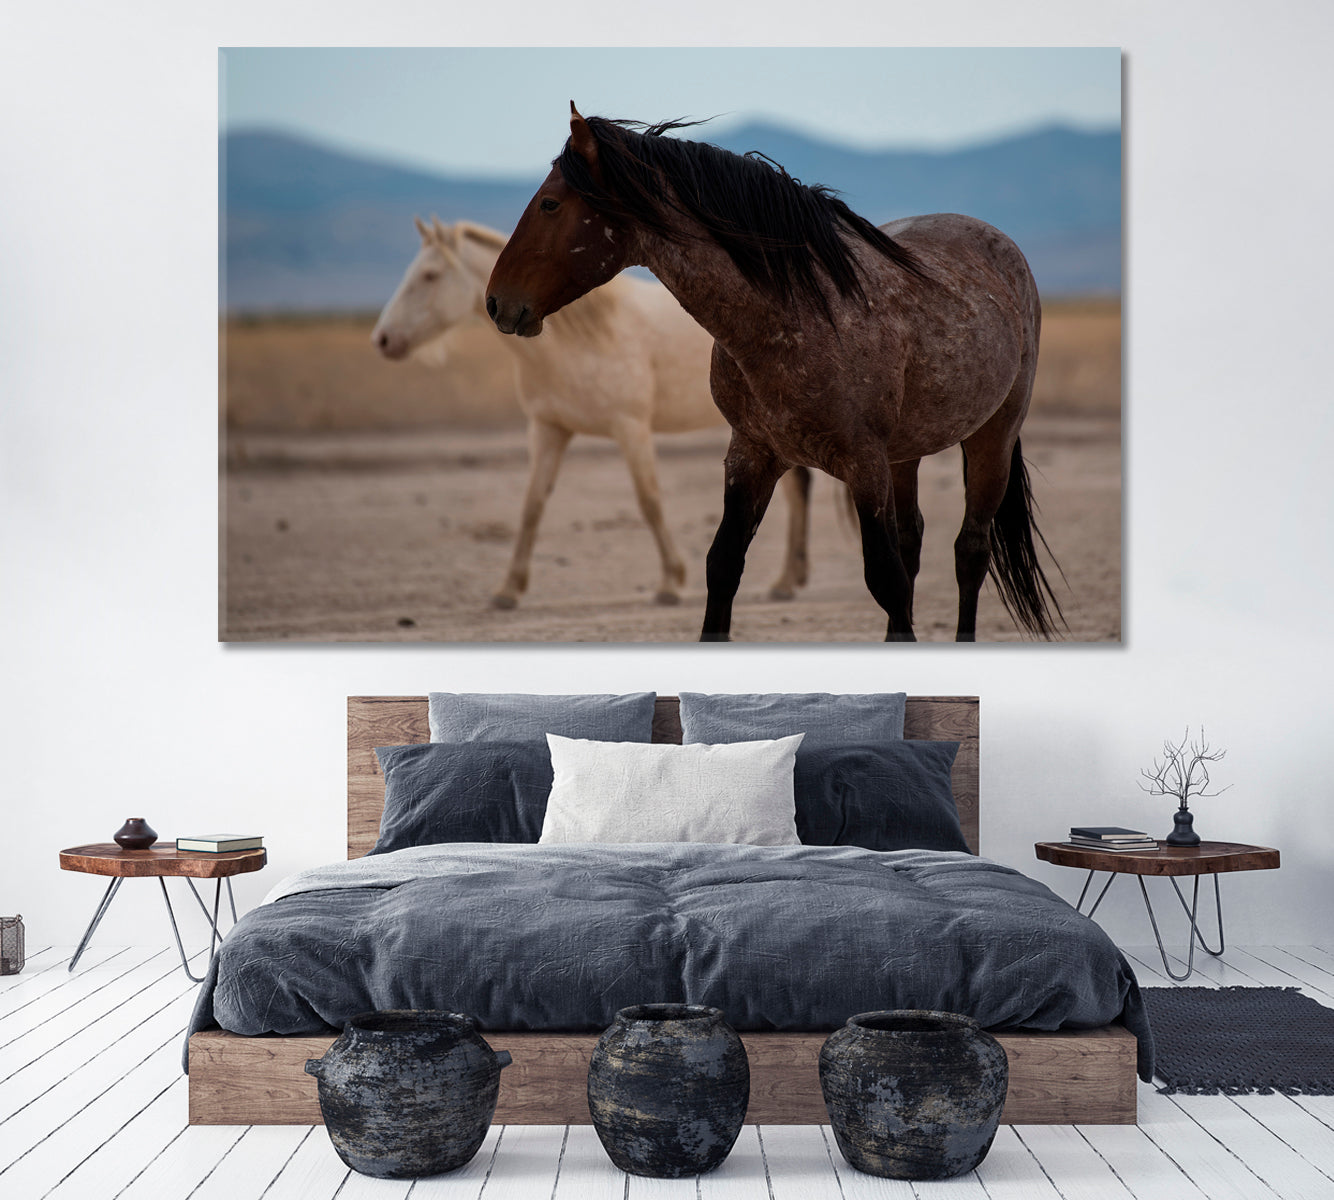 Wild Mustangs in Western Utah USA Canvas Print ArtLexy 1 Panel 24"x16" inches 